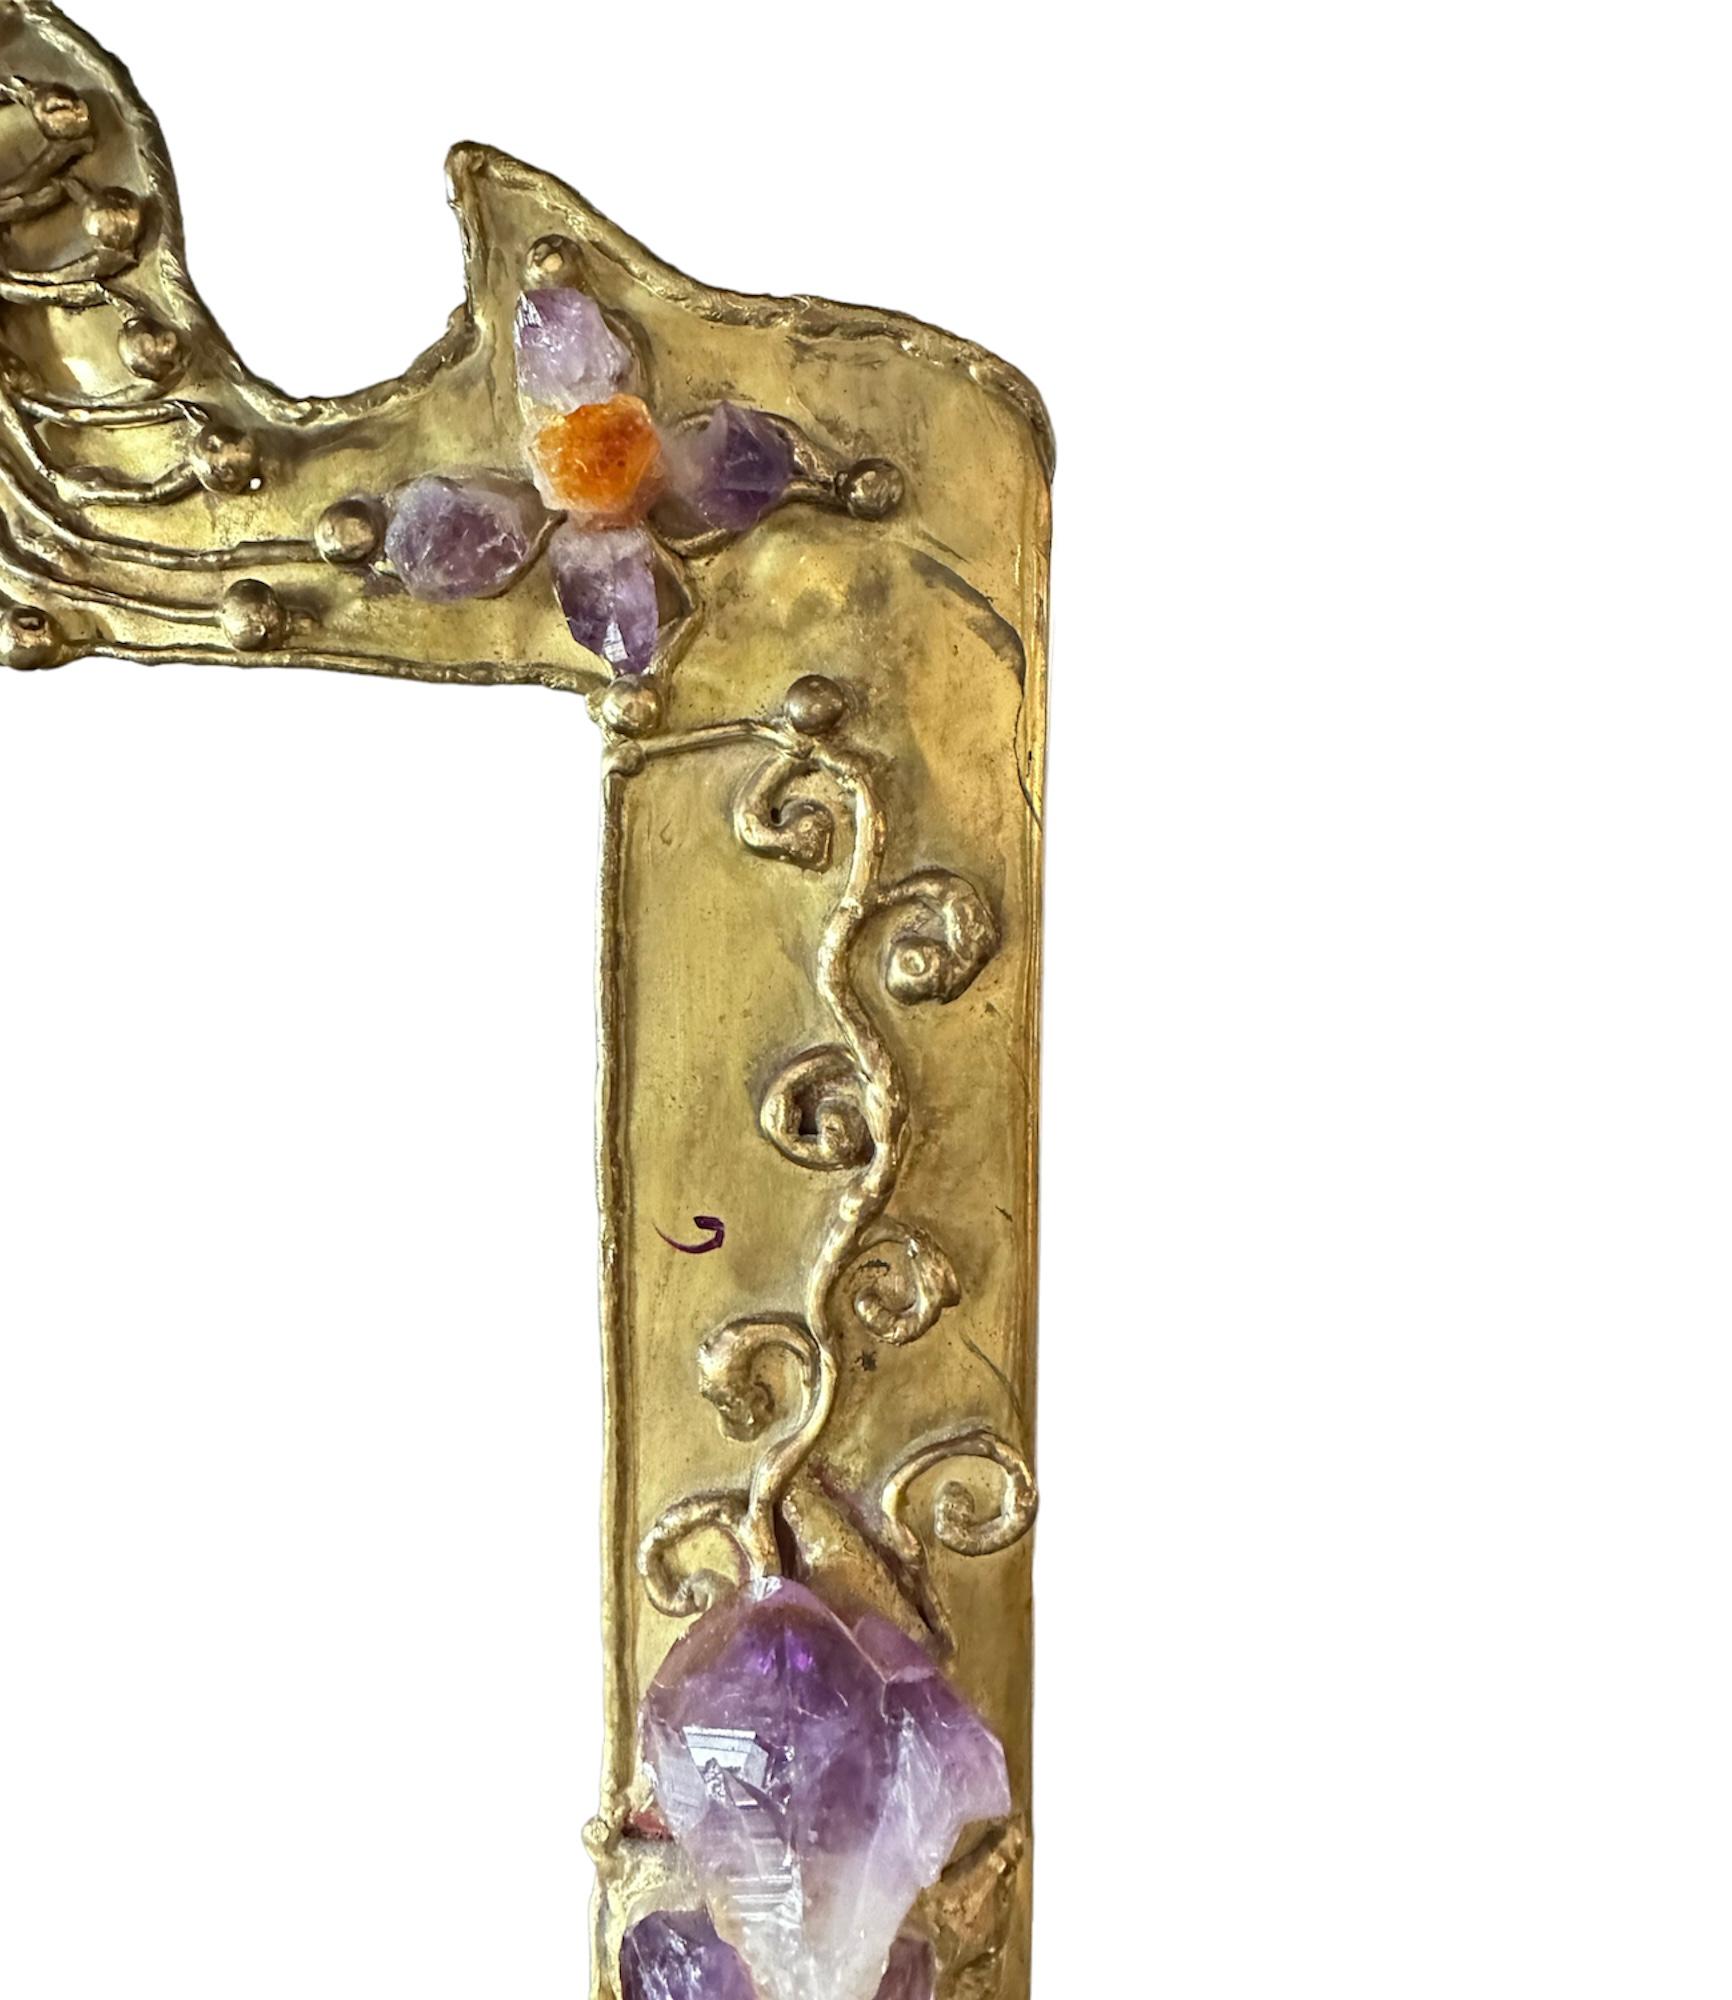 Cast Sculptural Frame, Jeweled Brass Witamethyst, Quartz and Copper Accents